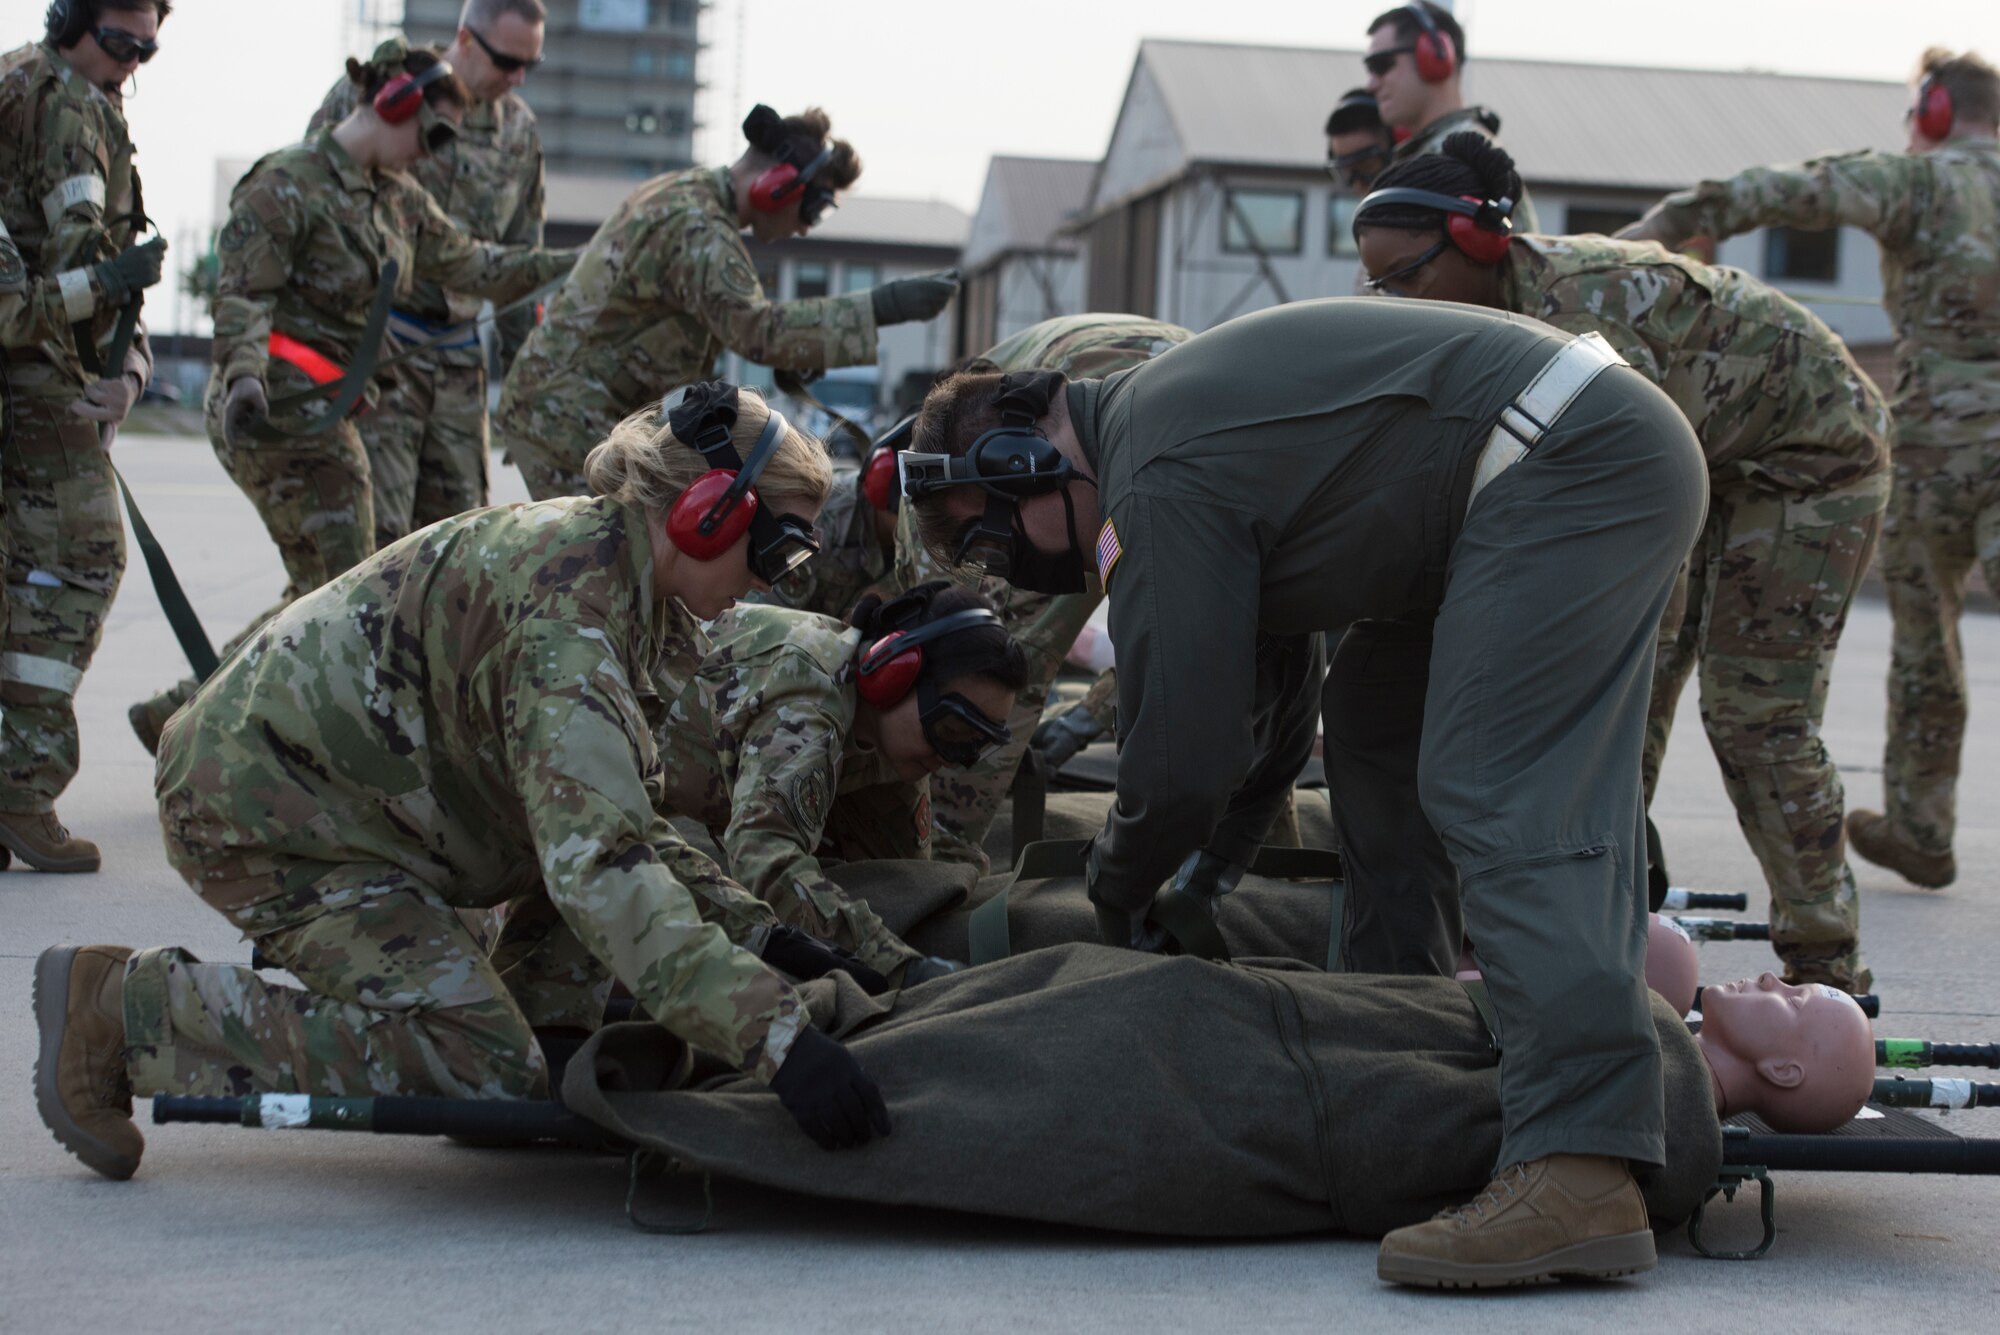 Airmen secure simulated victims to stretchers.